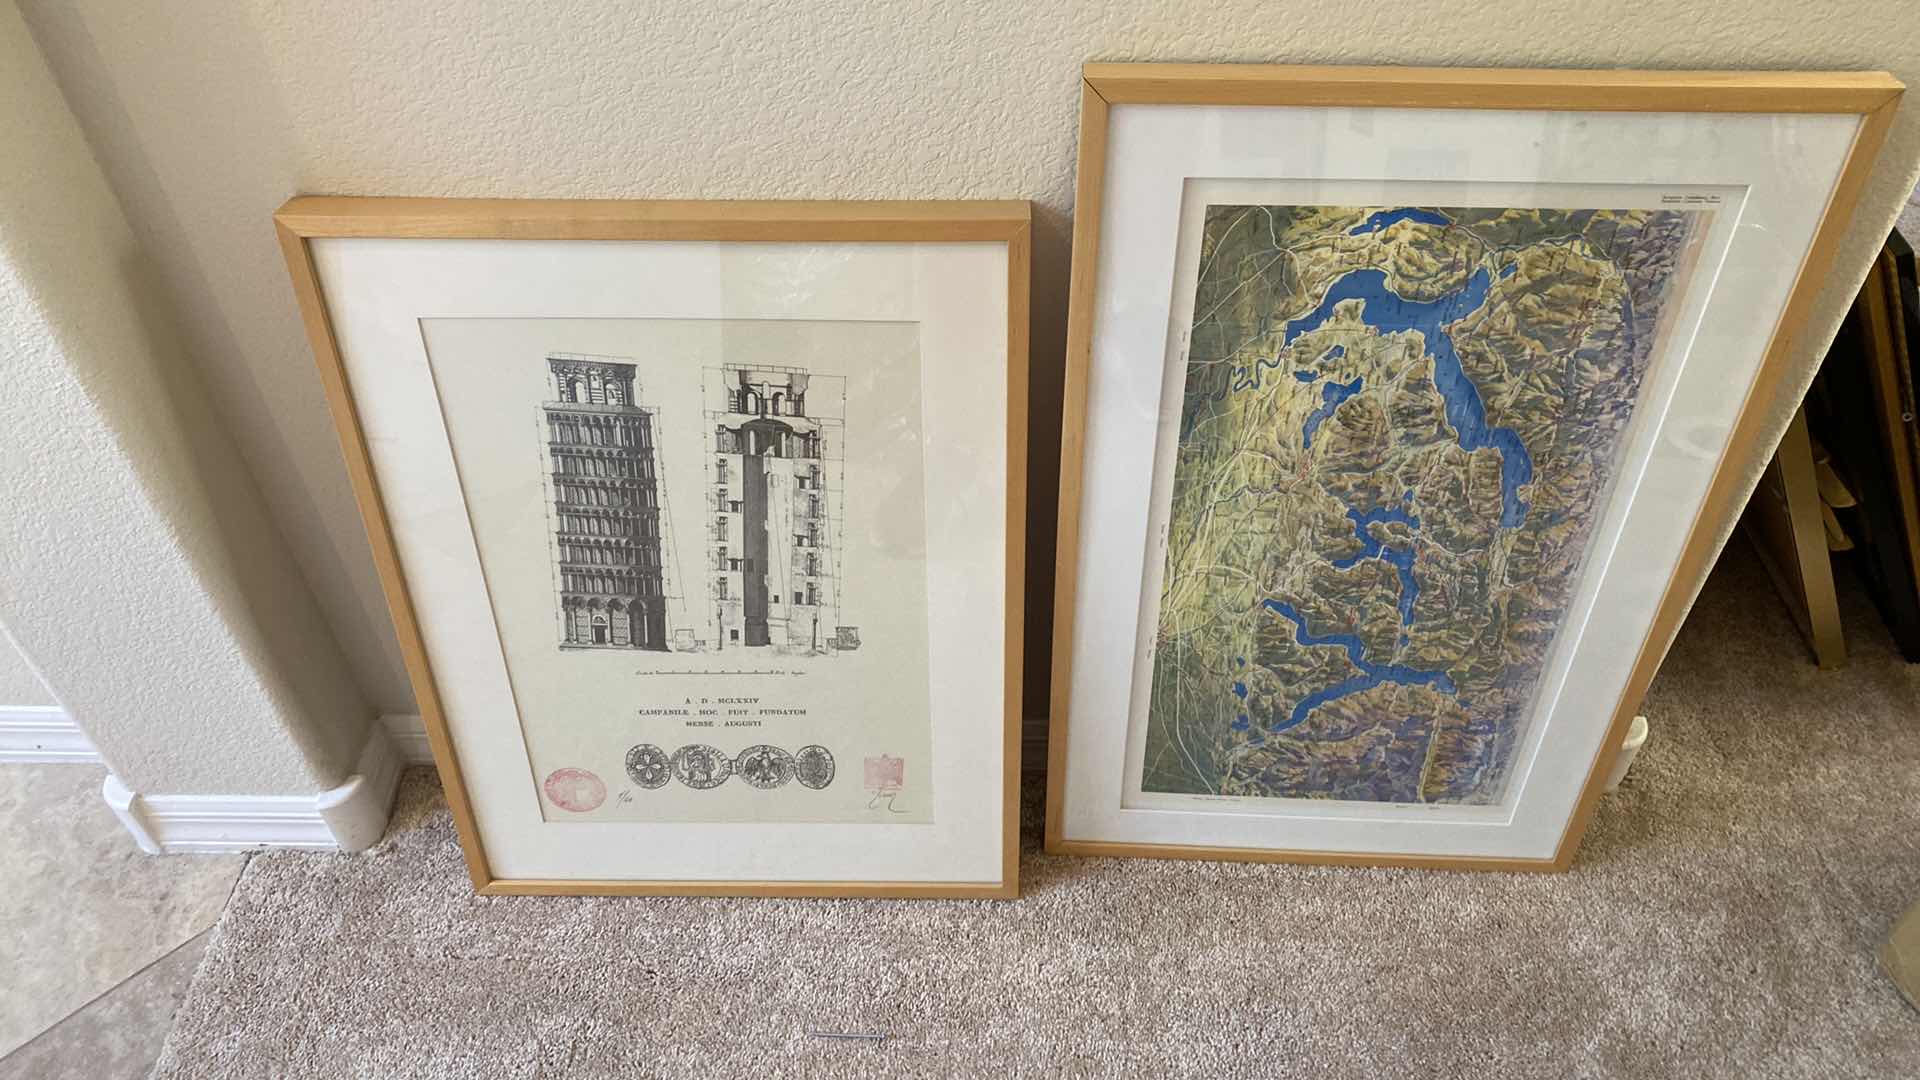 Photo 3 of 3 FRAMED POSTER ARCHITECTURE AND MAP ARTWORK, LARGEST 18 1/2” x 29 1/2”